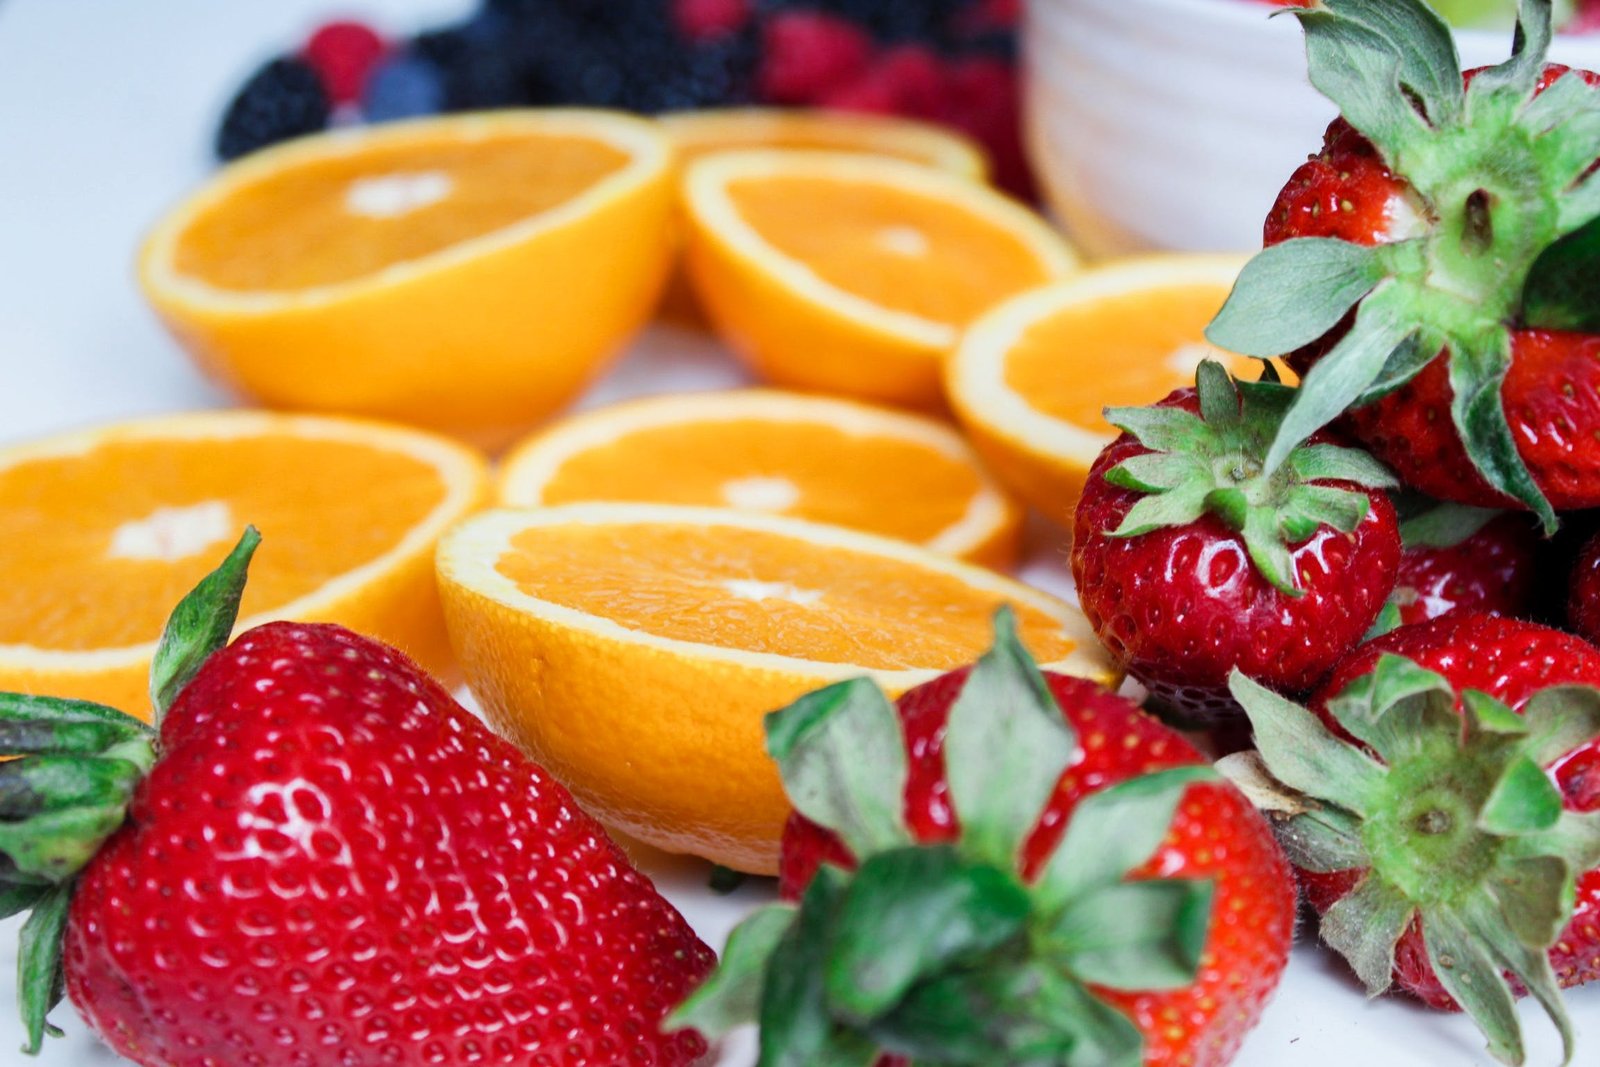 What Are The Best Fruits For An Energy Boost?